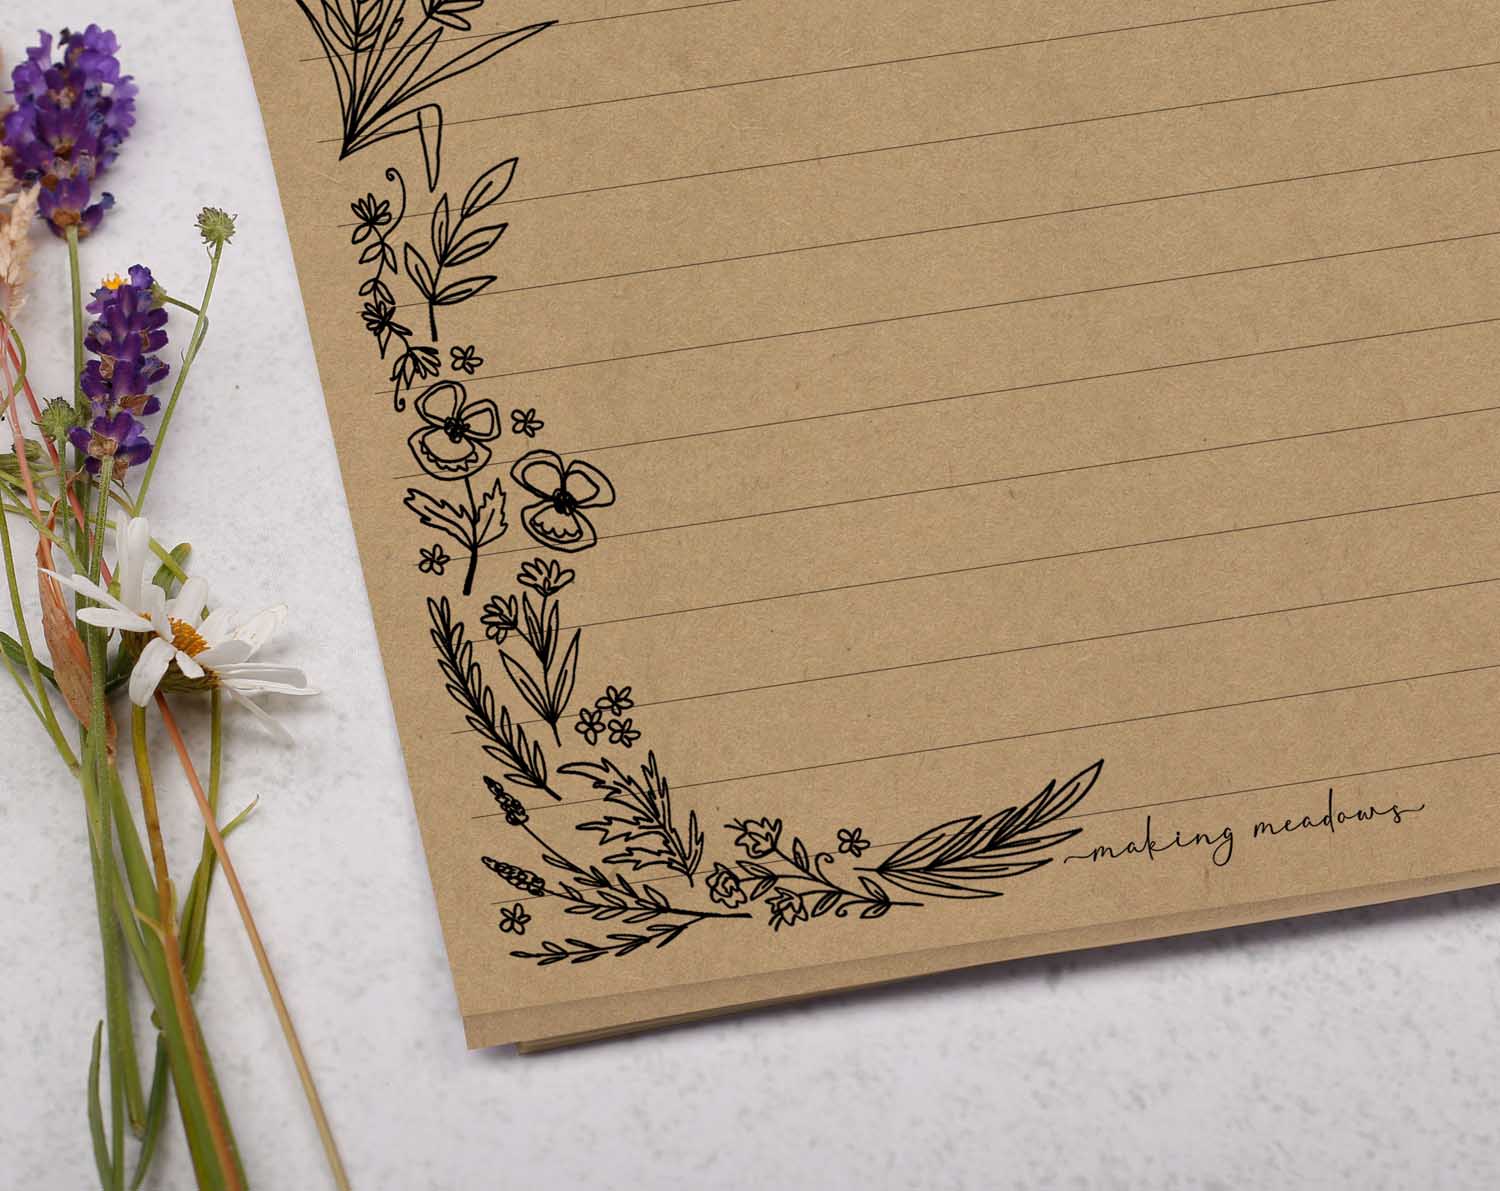 A5 Kraft letter writing paper sheets with monochrome floral design.